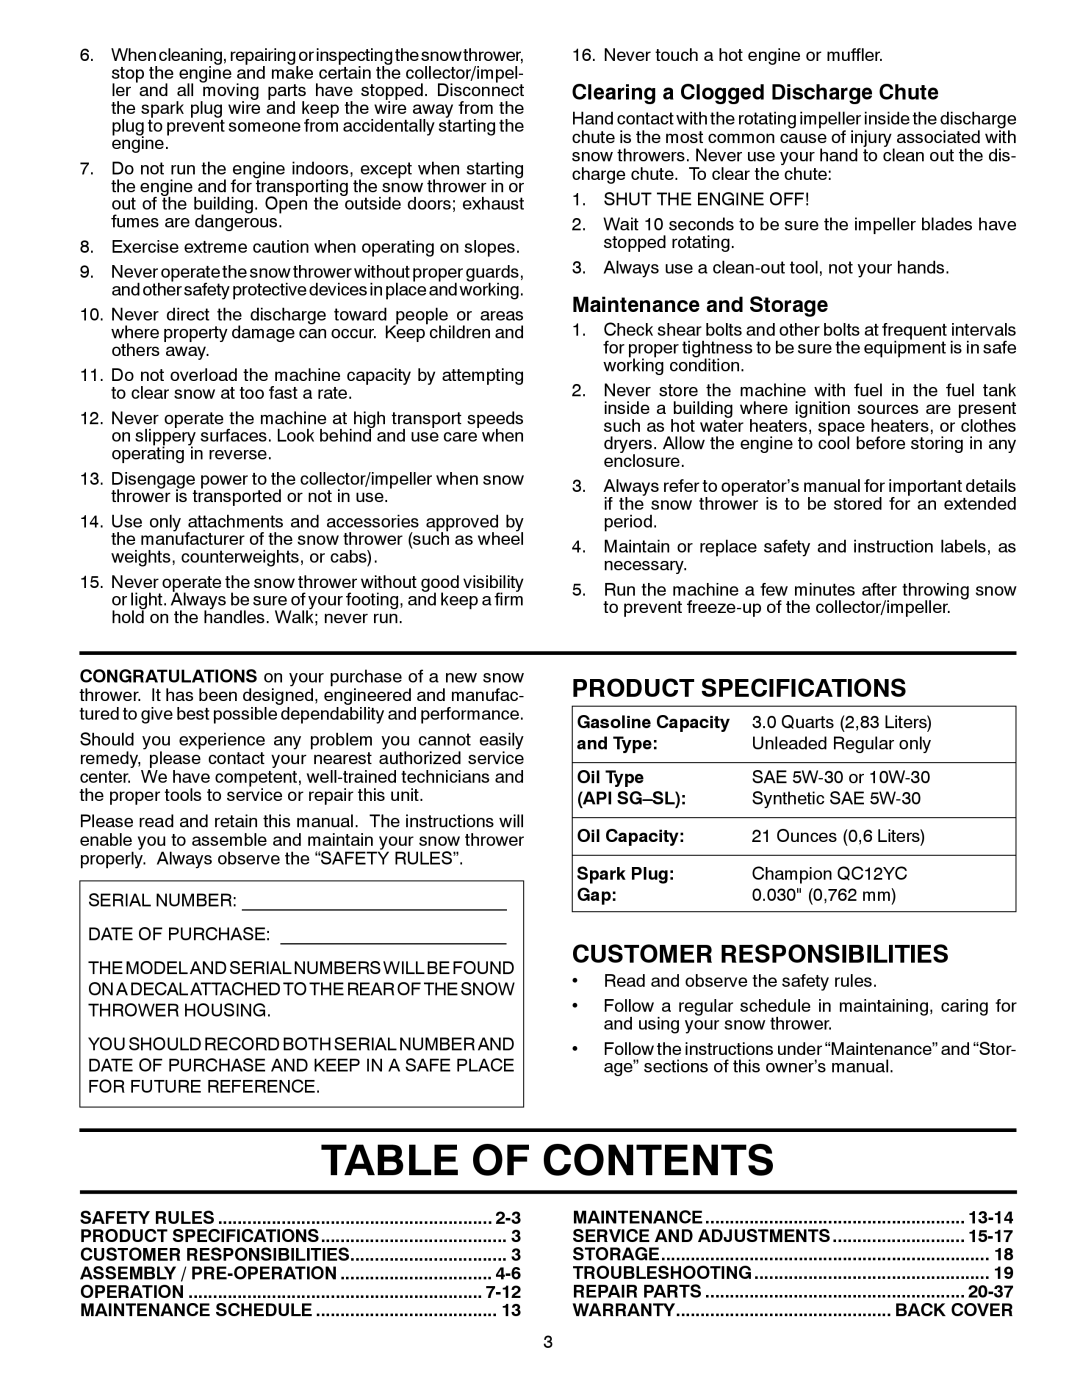 Poulan 96192003301 Table Of Contents, Product Specifications, Customer Responsibilities, Maintenance and Storage, and Type 